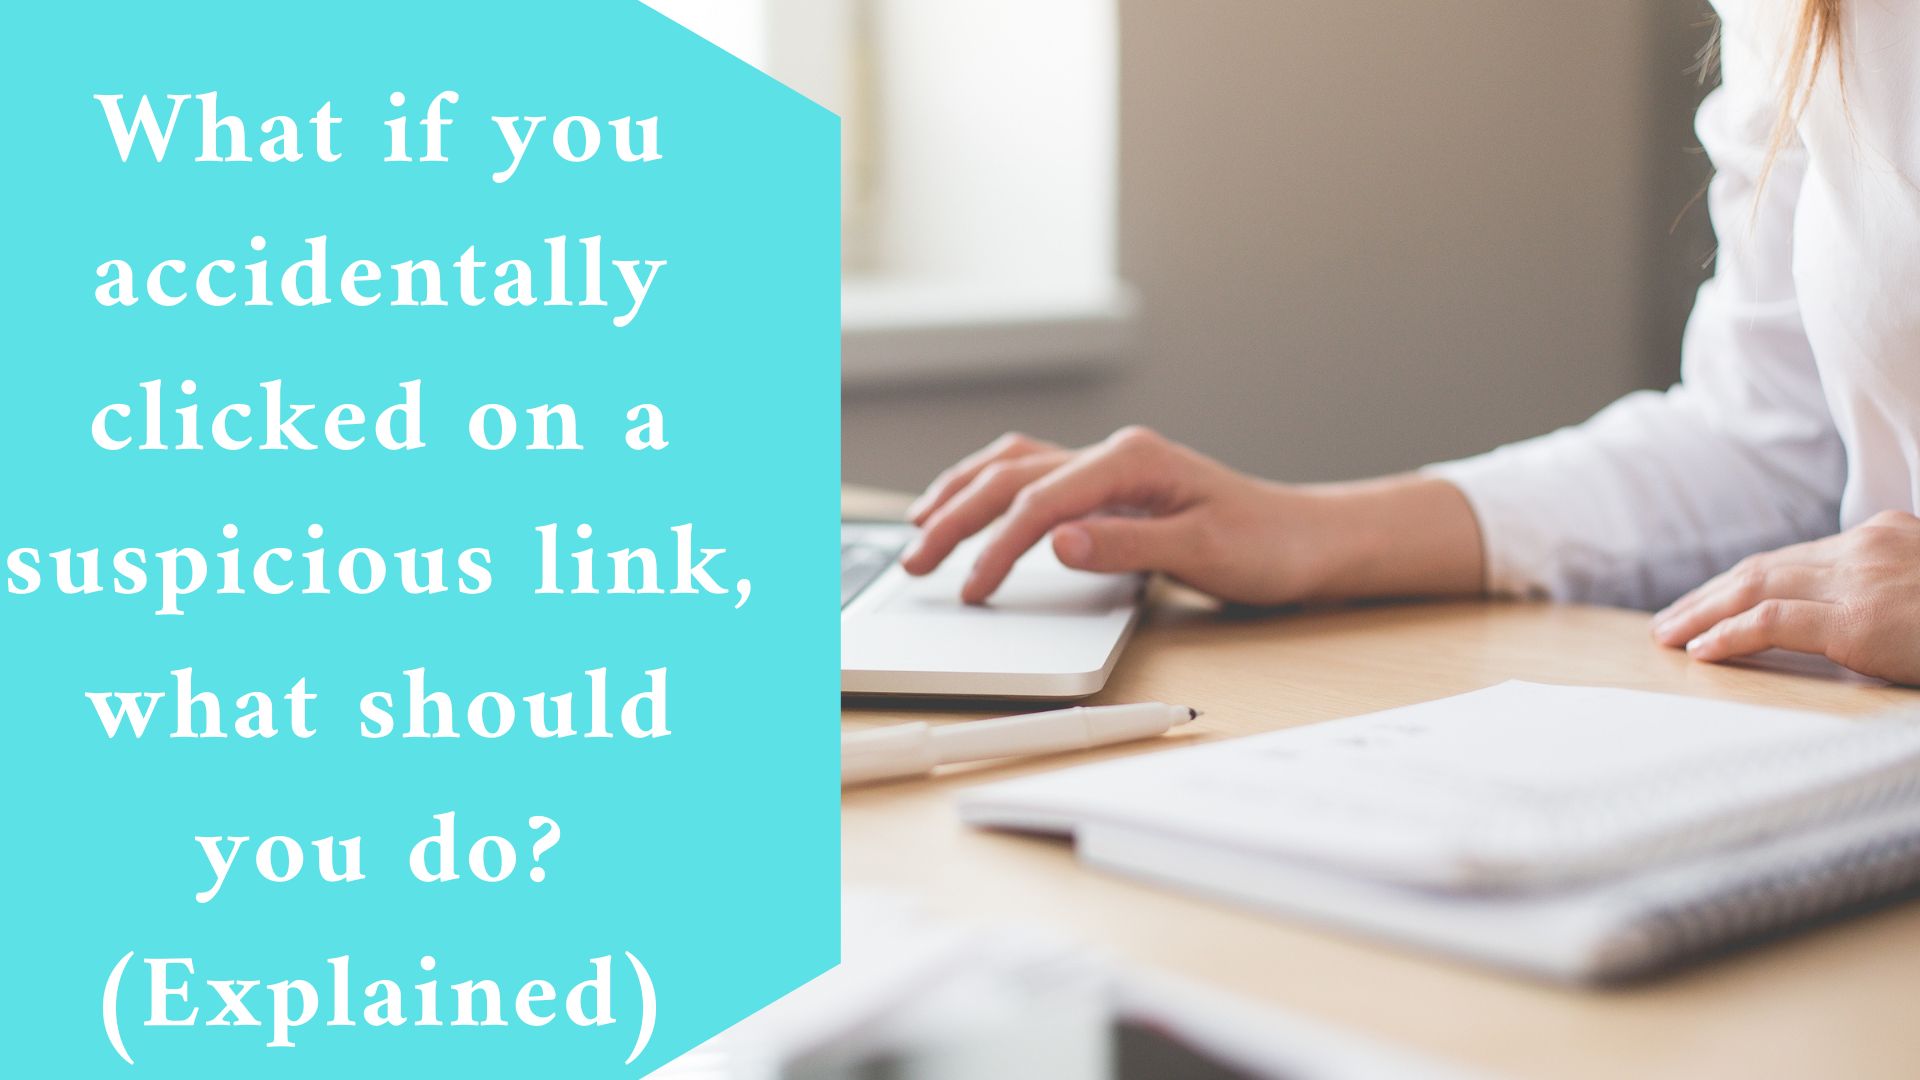 What if you accidentally clicked on a suspicious link, what should you do?